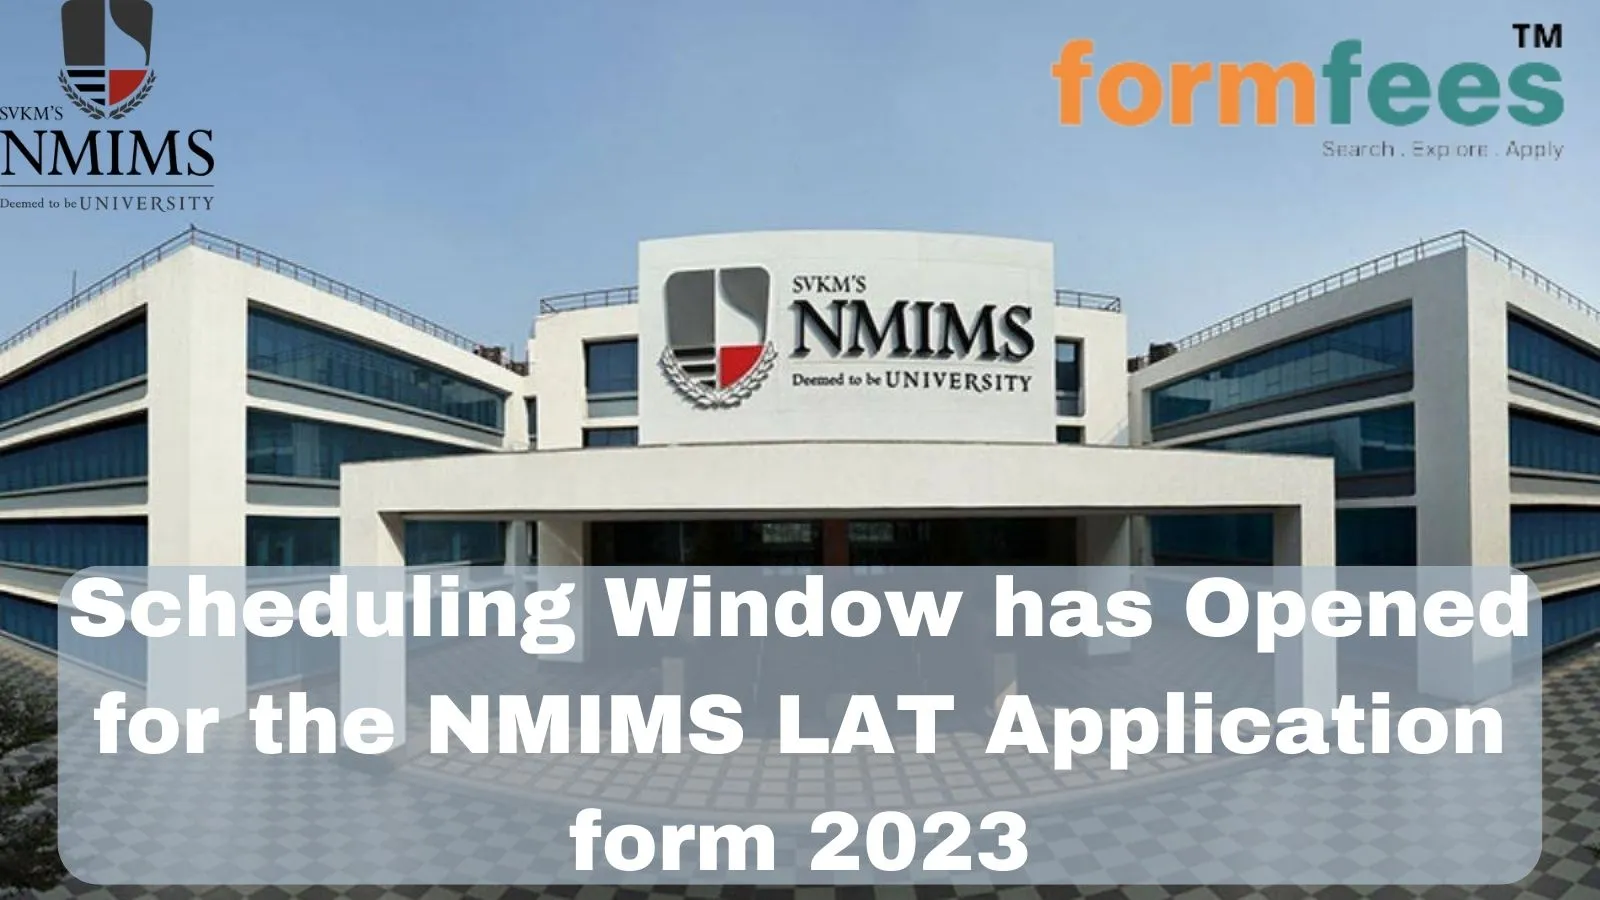 NMIMS LAT Application form 2023